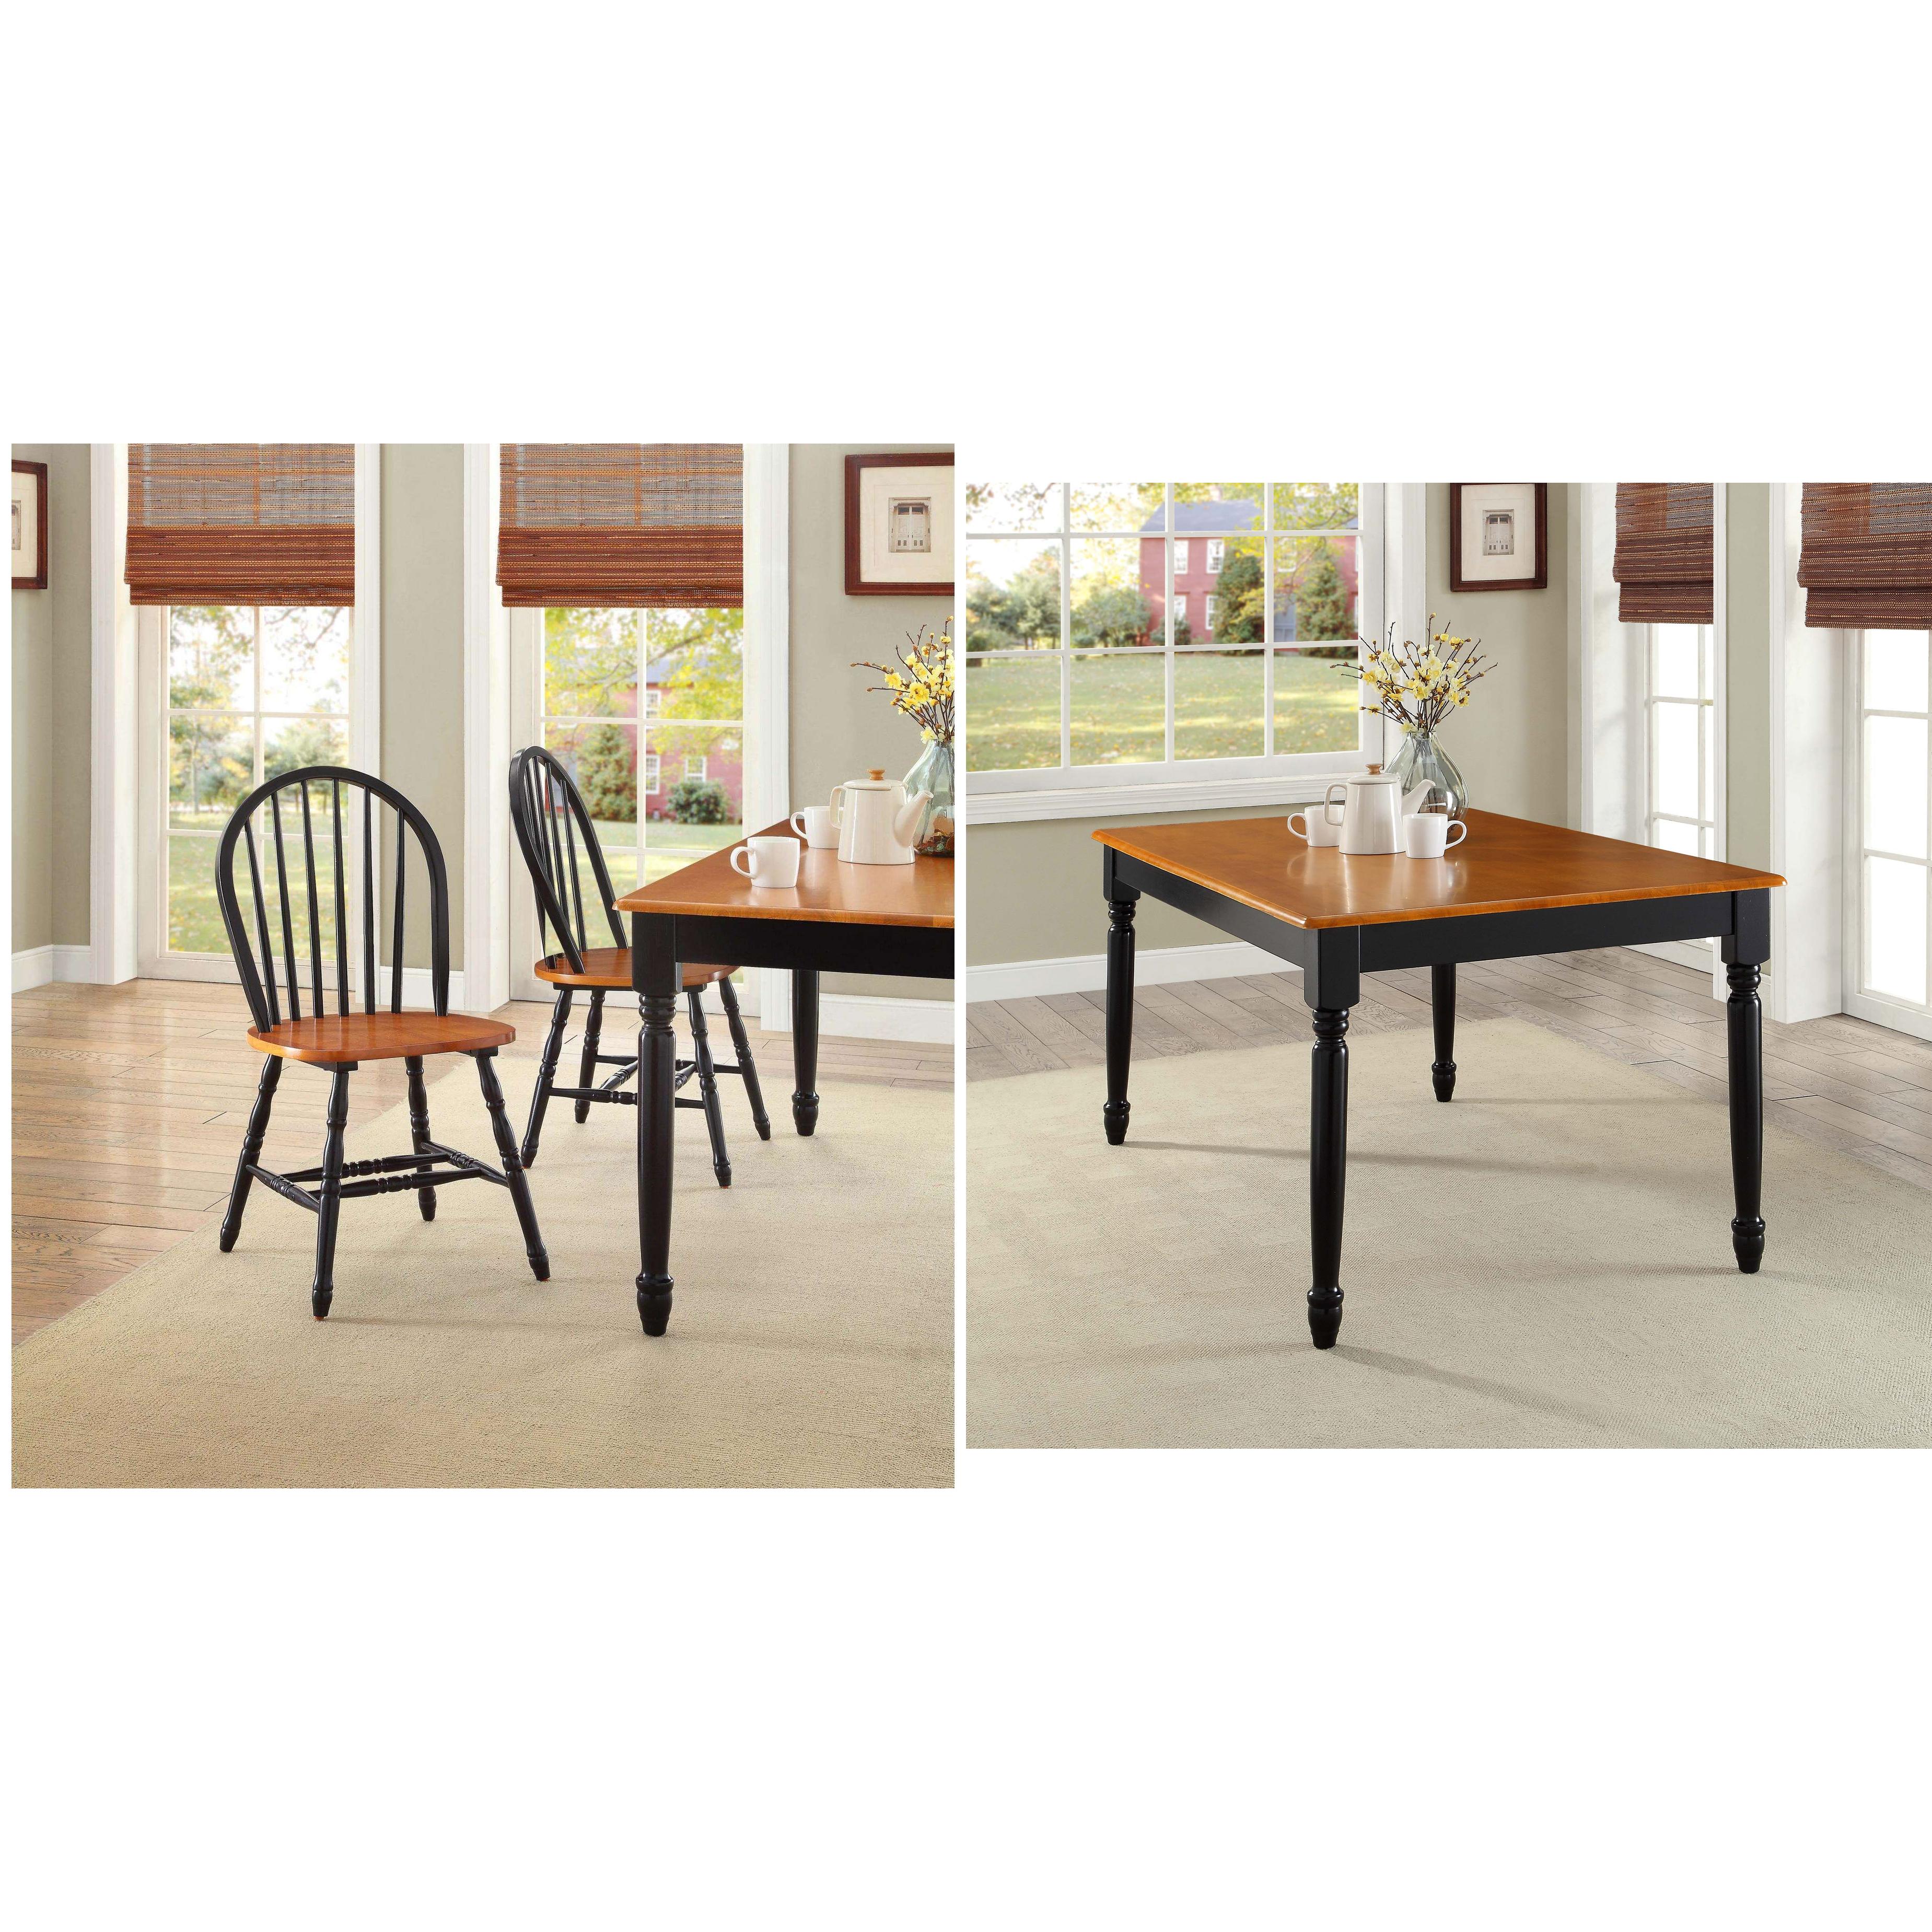 Better Homes and Gardens&amp;reg Autumn Lane 7 Piece Dining Set, Black and Oak - image 1 of 3